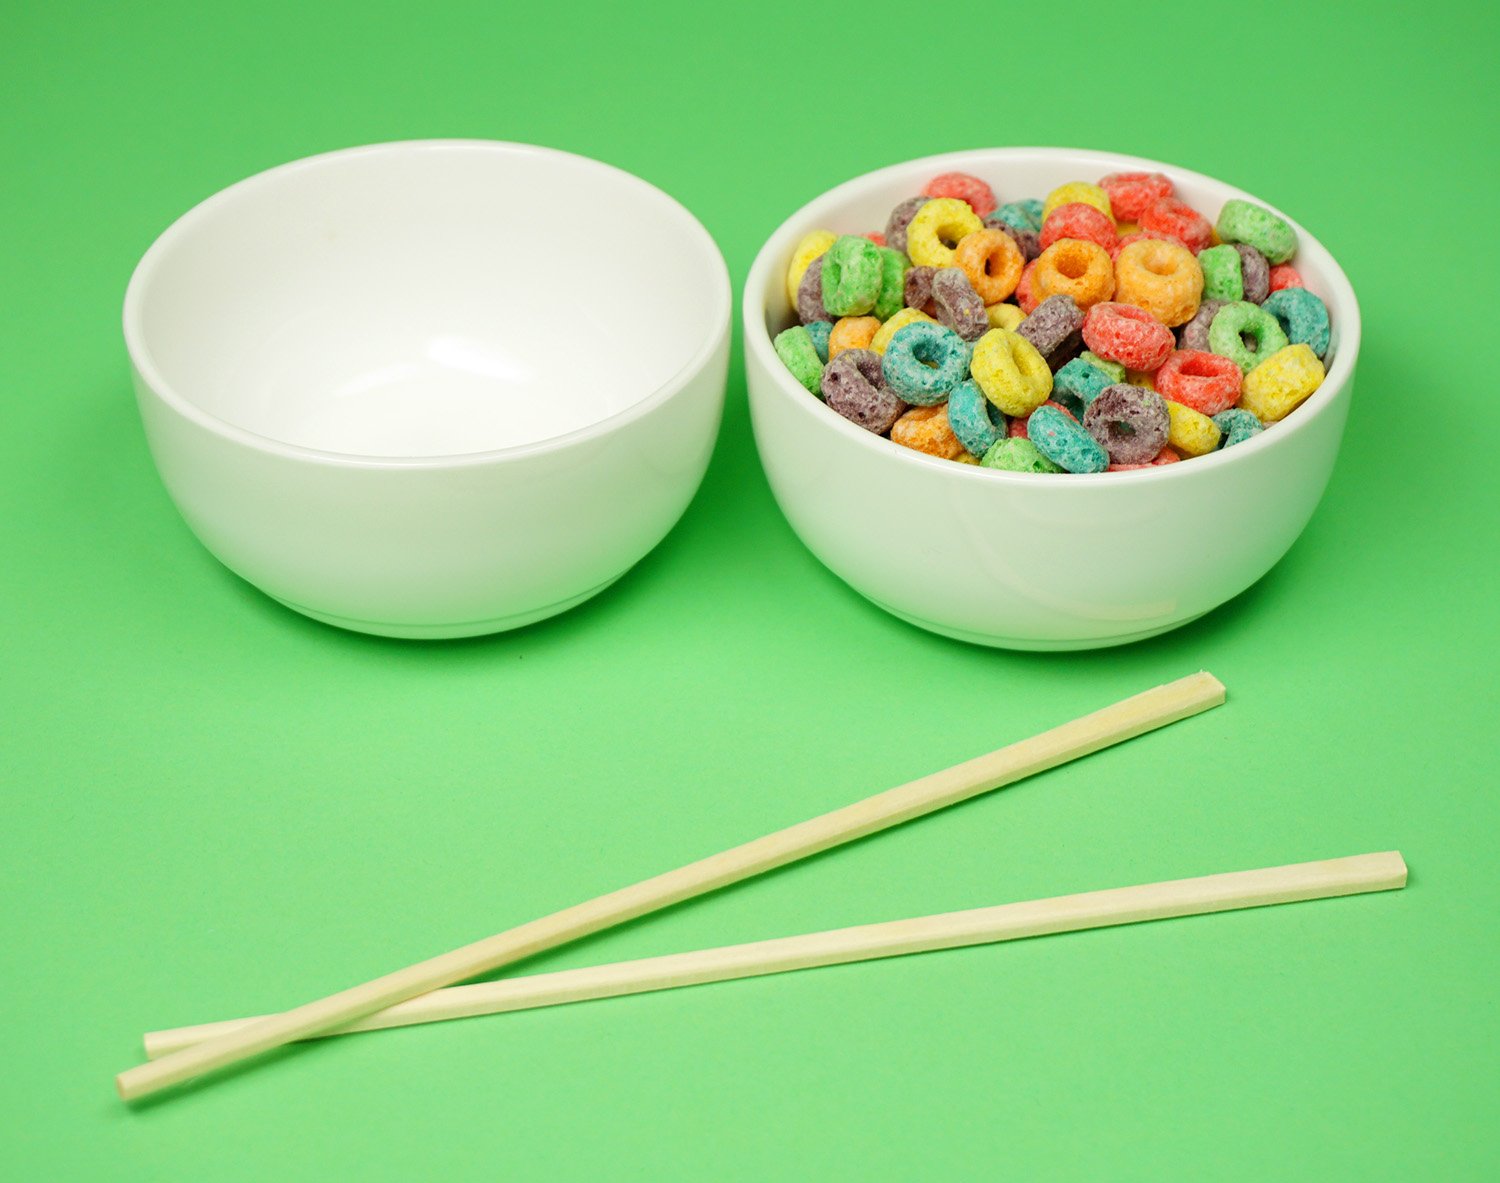 empty bowl, bowl filled with cereal and two chop sticks